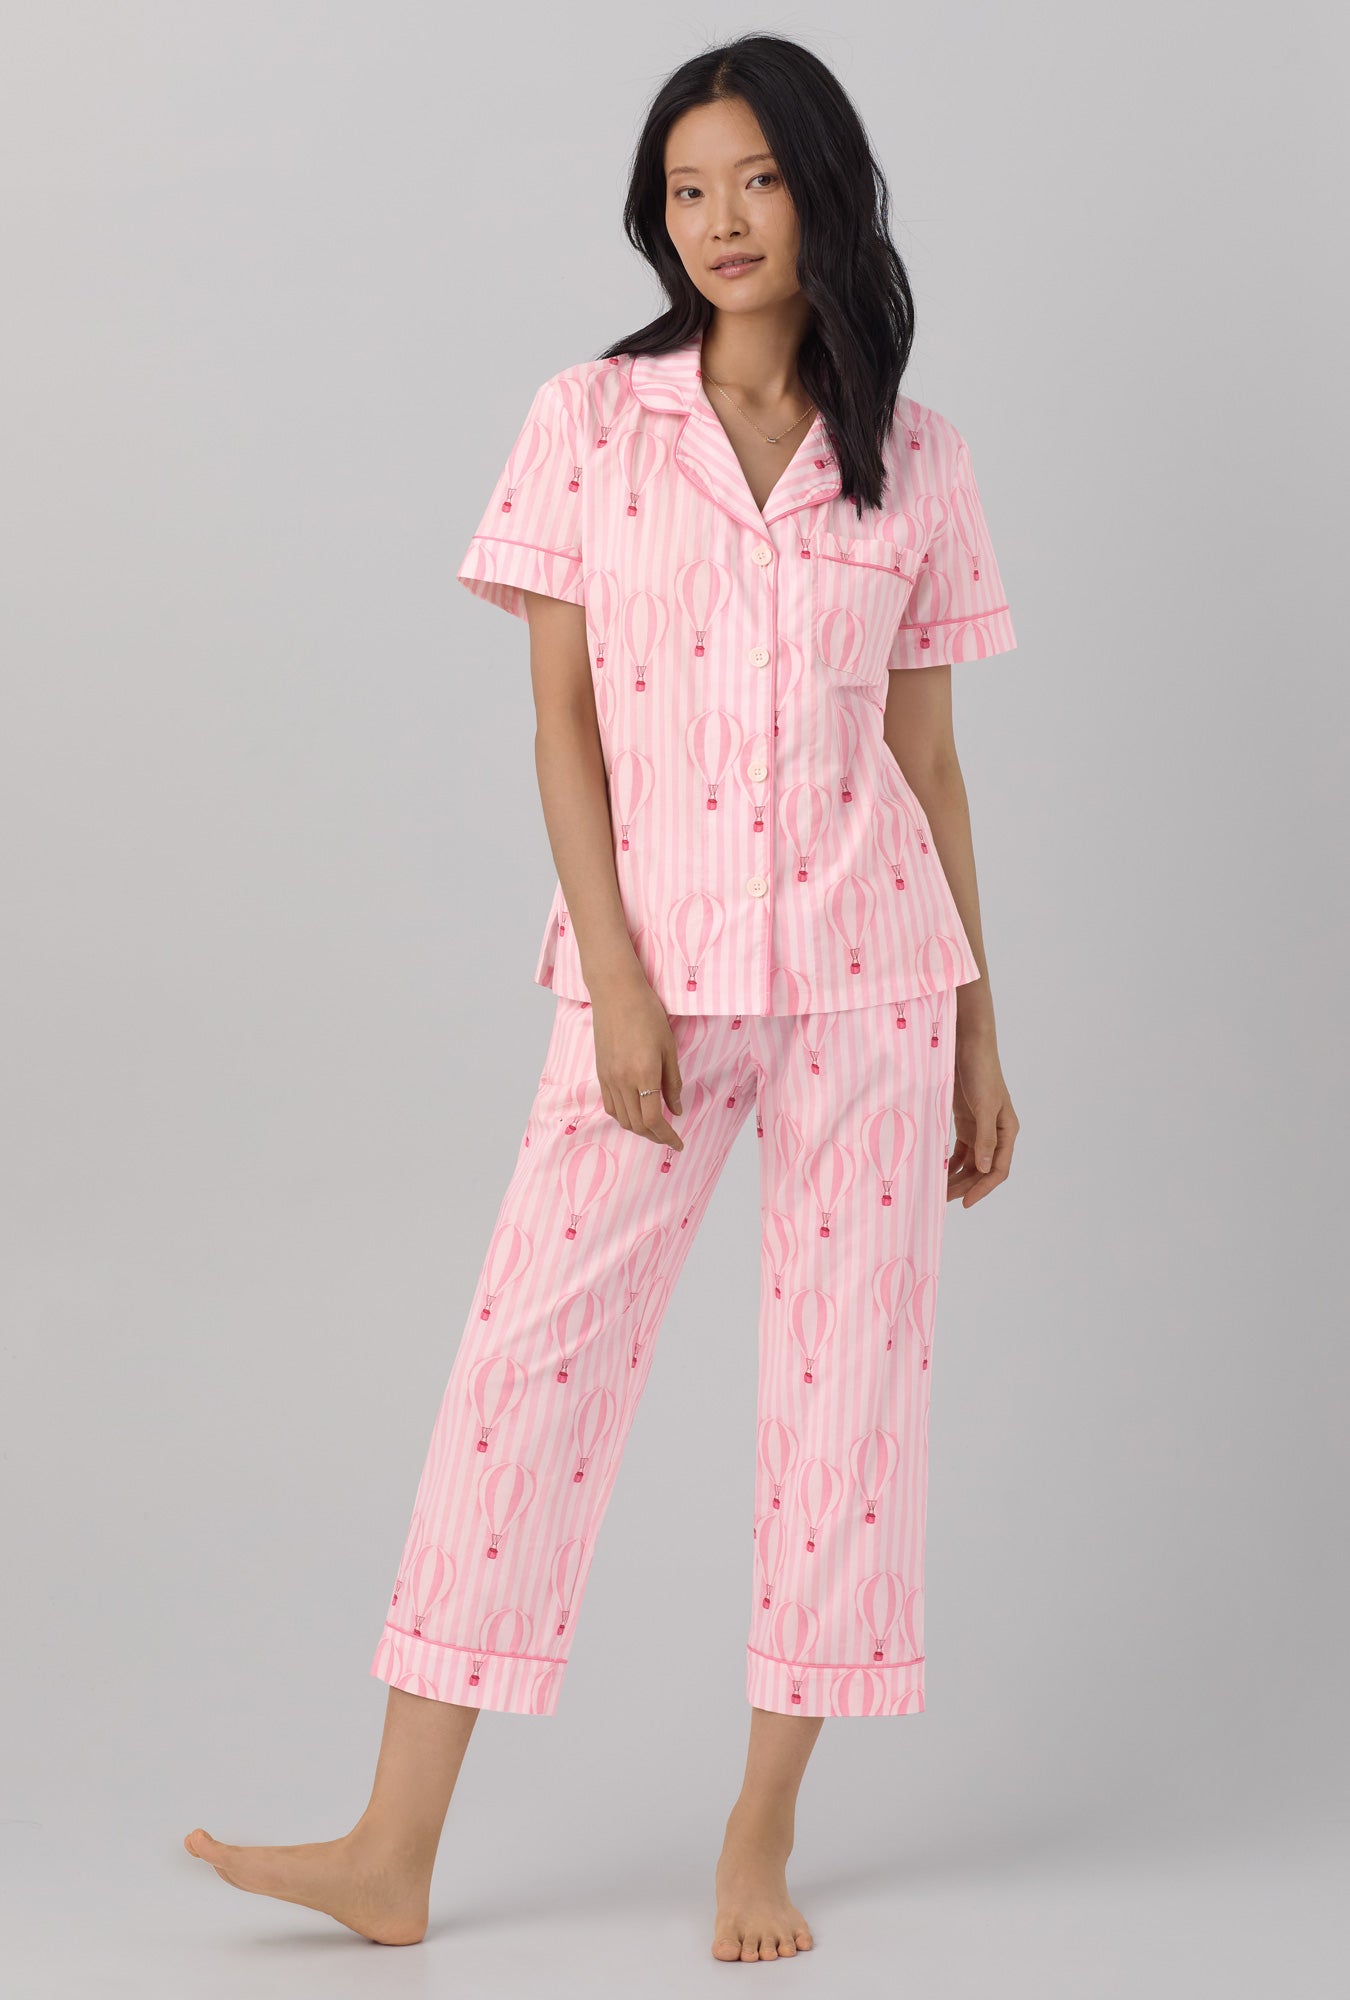 A lady wearing Short Sleeve Classic Woven Cotton Poplin Cropped PJ Set with balloon ride print